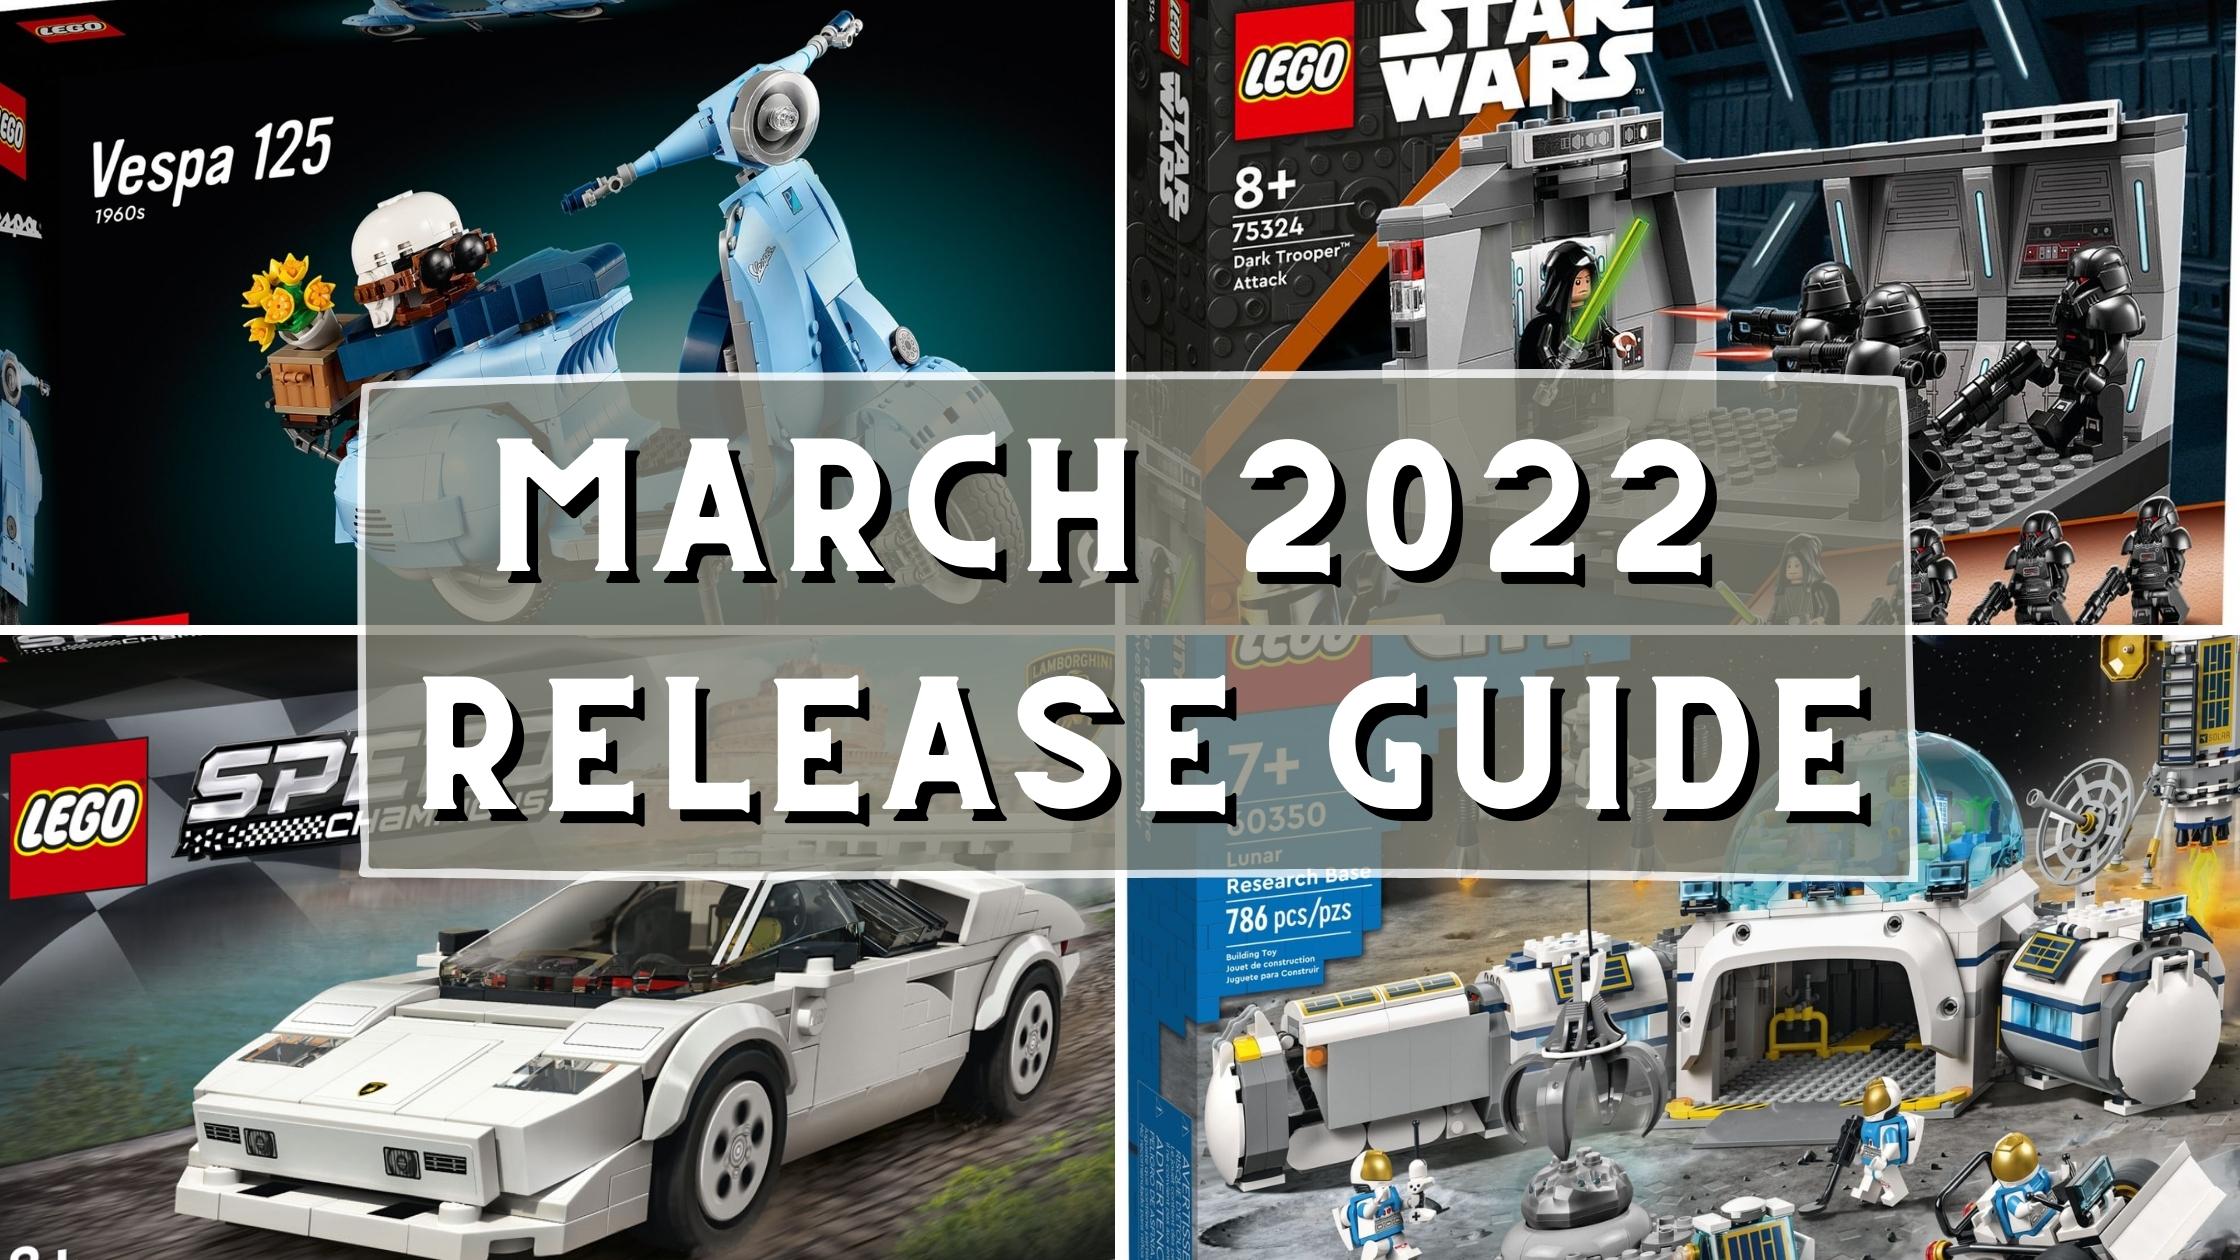 Lego Calendar March 2022 Buying Guide: All The New Lego Sets Releasing On 1 March 2022 - Jay's Brick  Blog